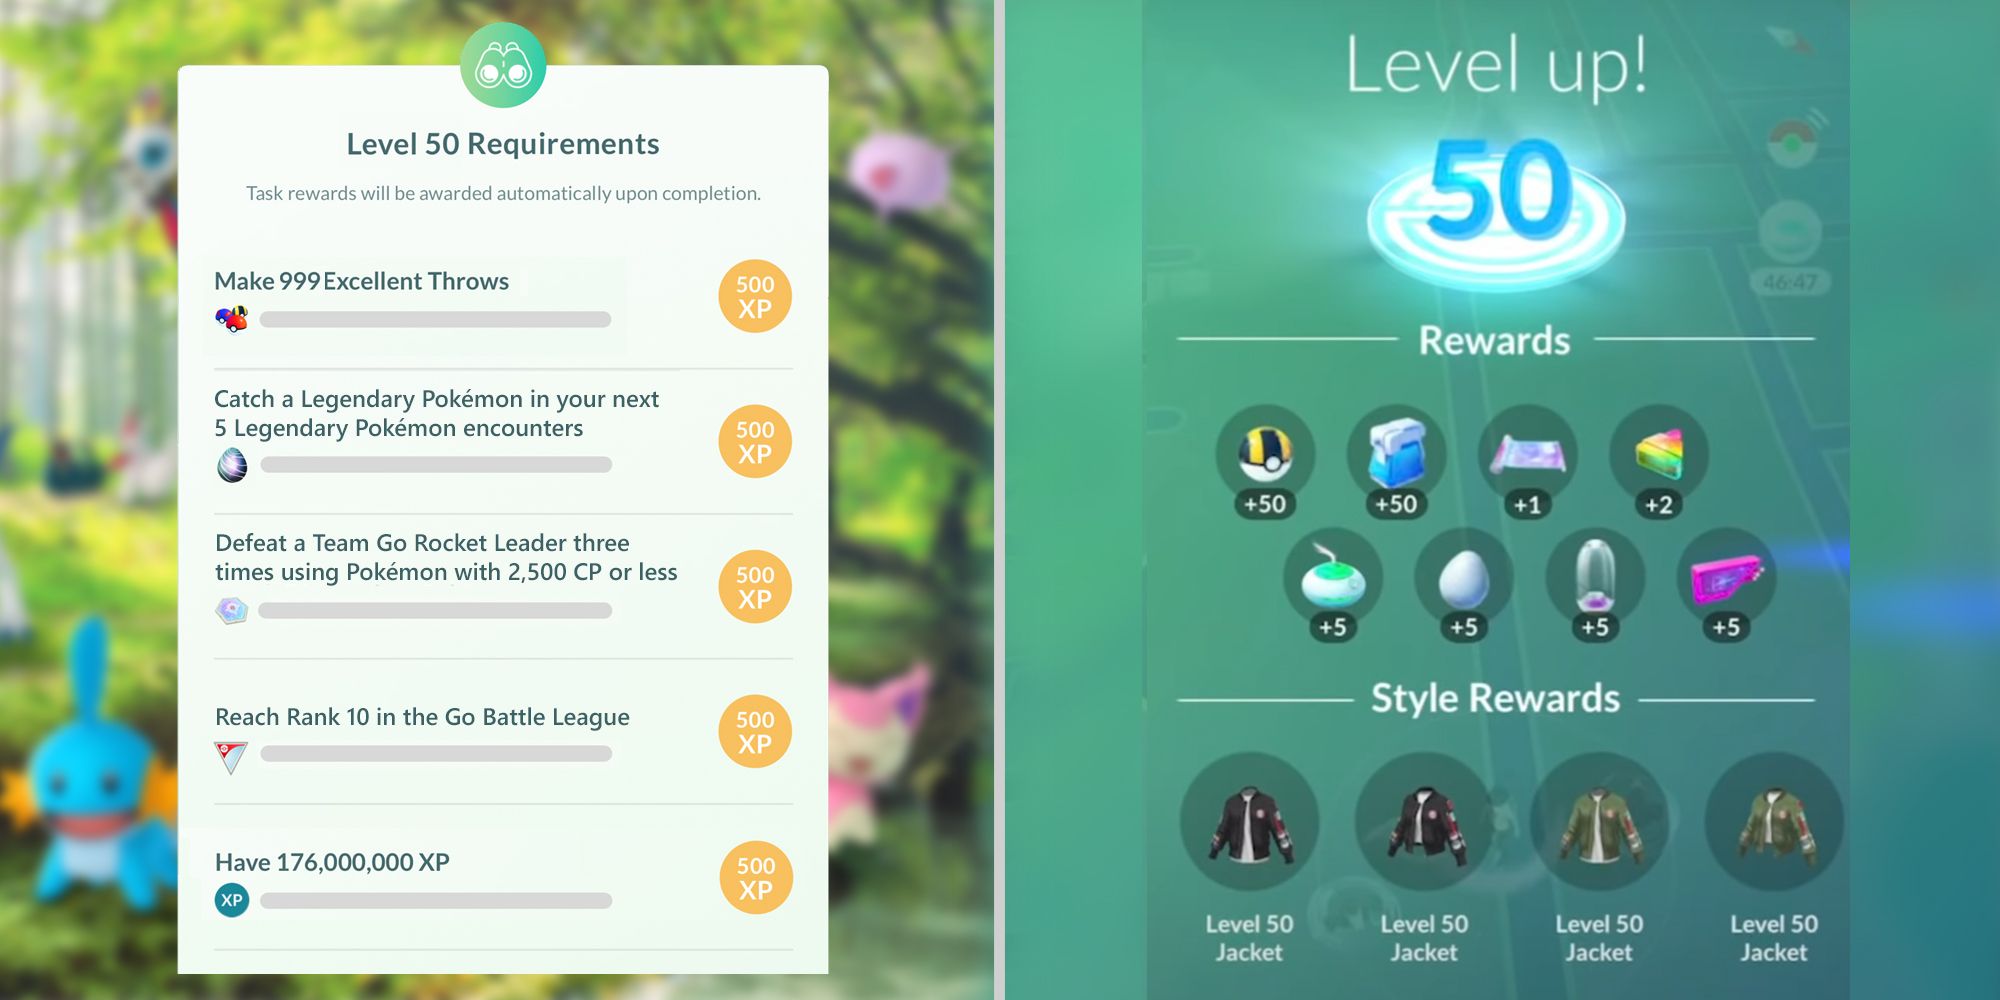 Requirements and rewards for level 50 in Pokemon Go